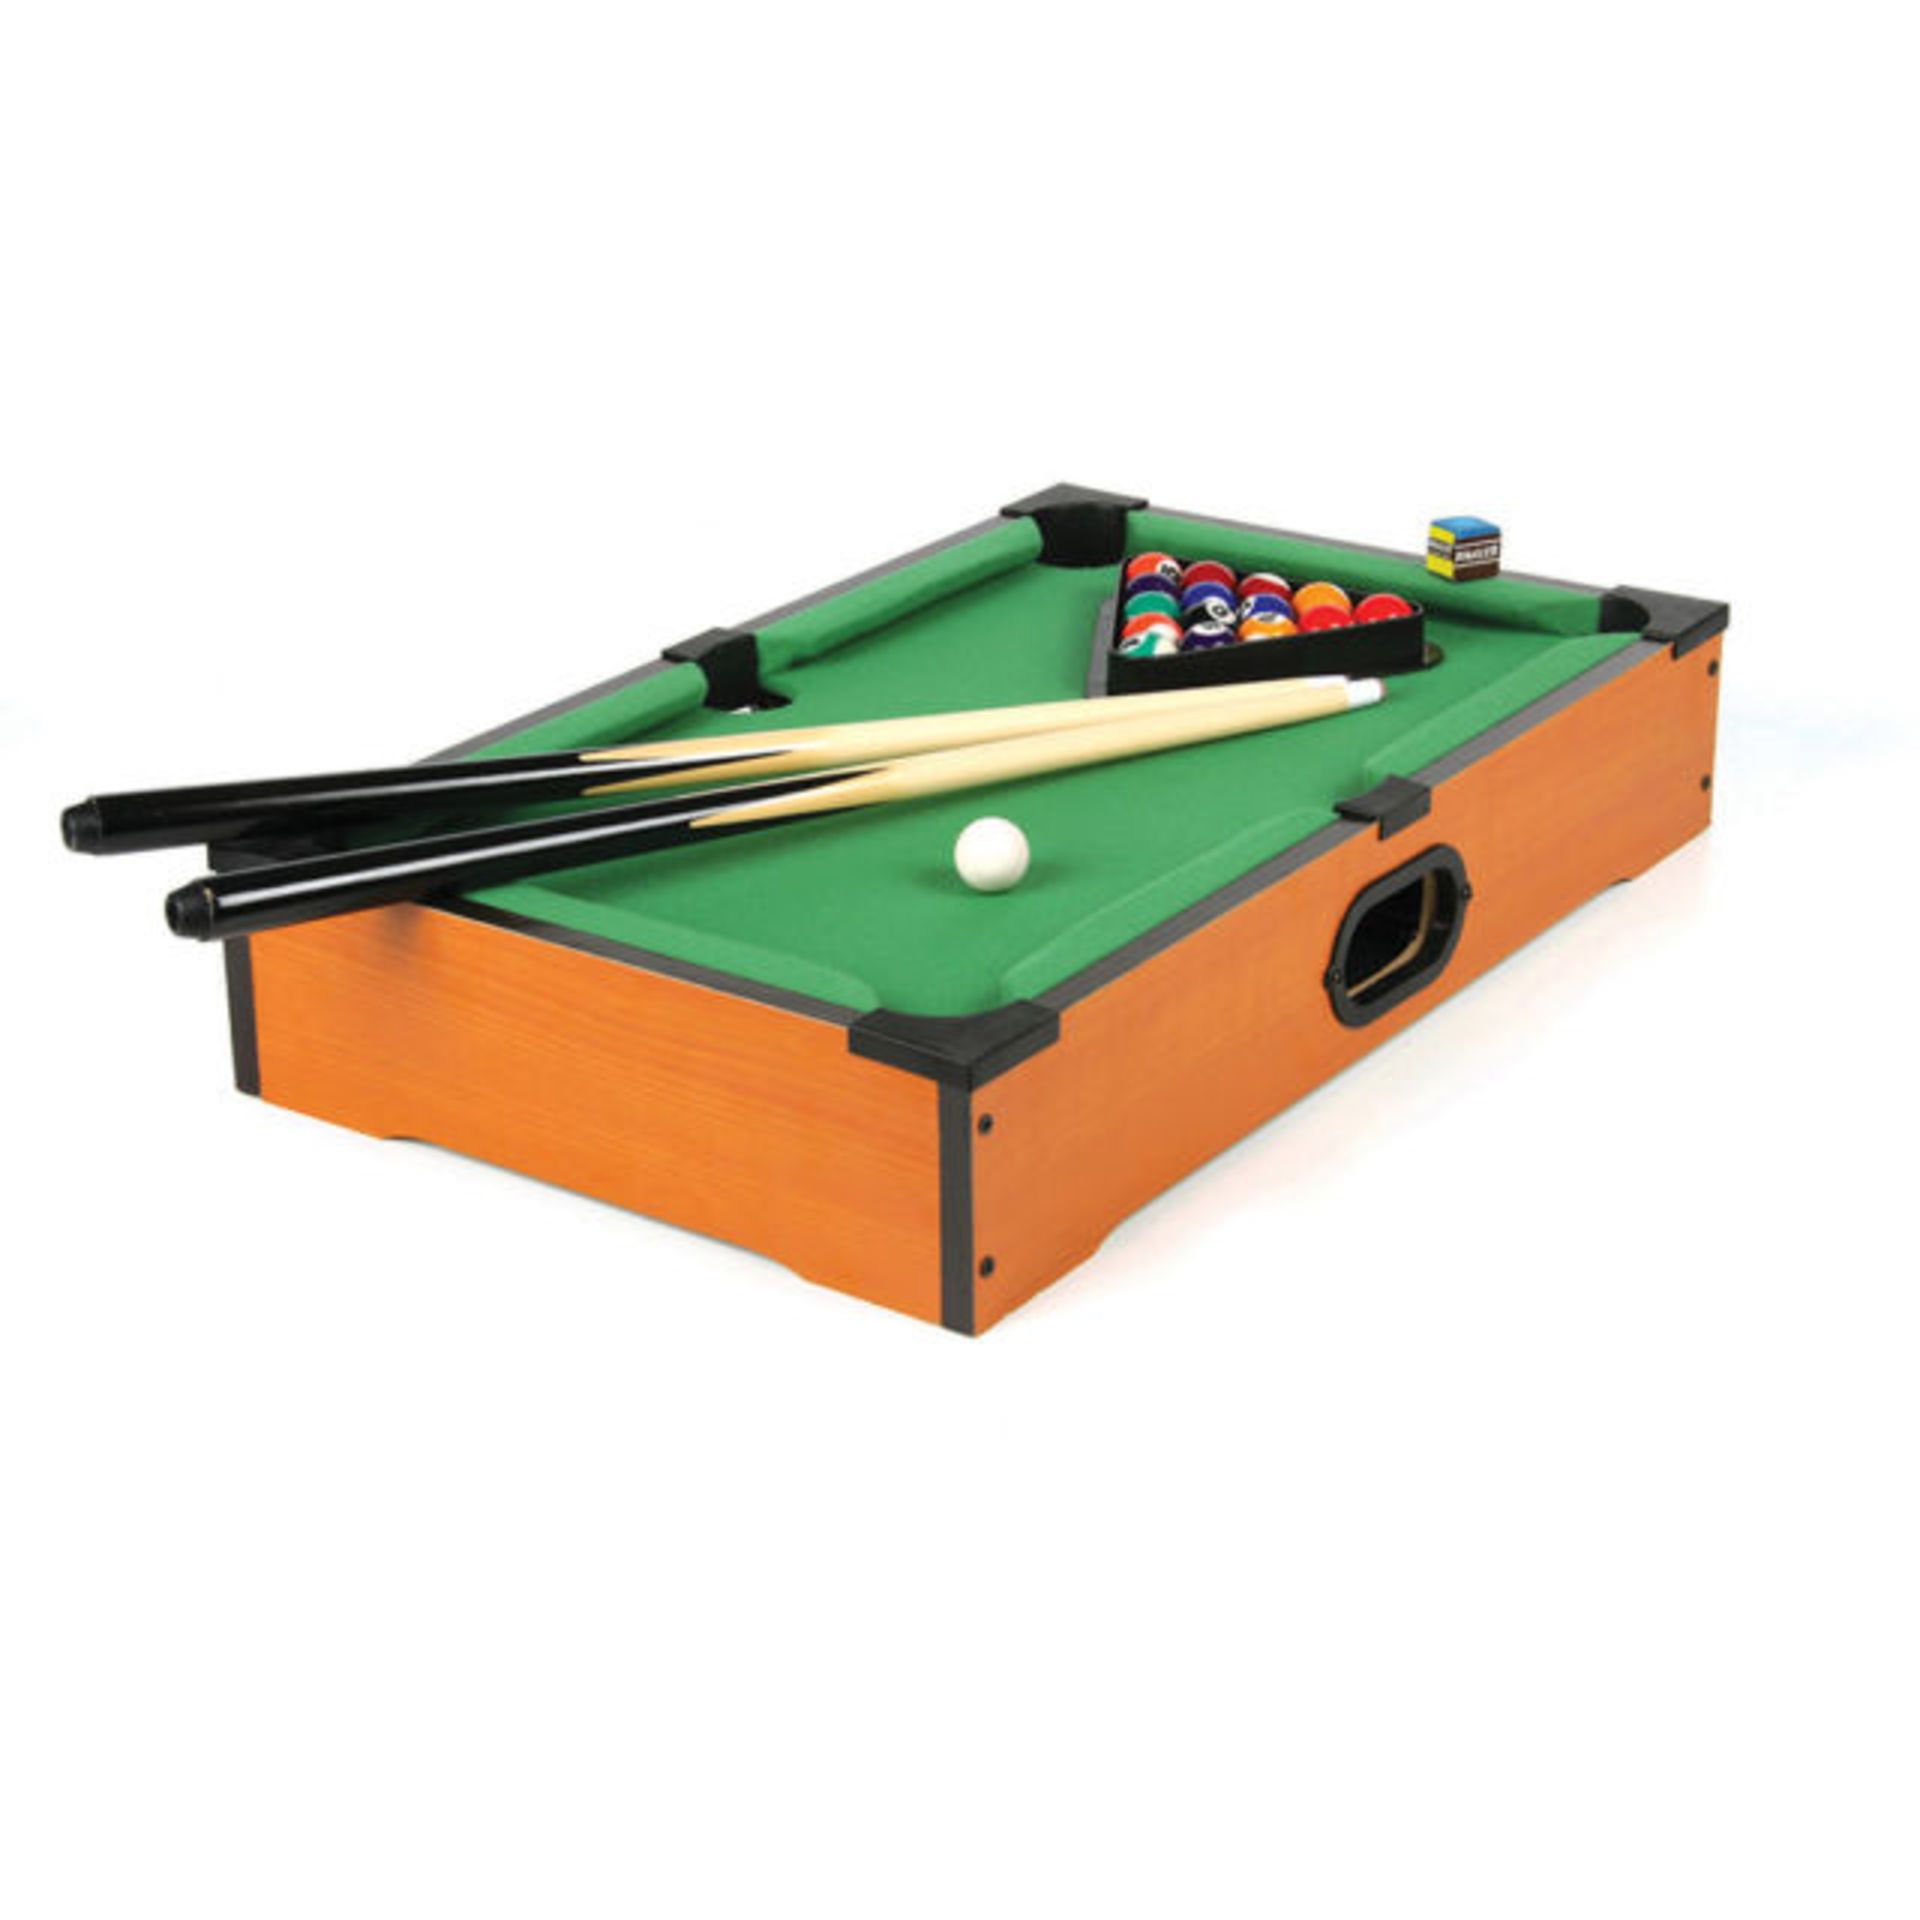 + VAT Brand New Table Top Pool - eBay Price £29.41 - Coloured & Numbered Balls Inc Cue Ball - 2